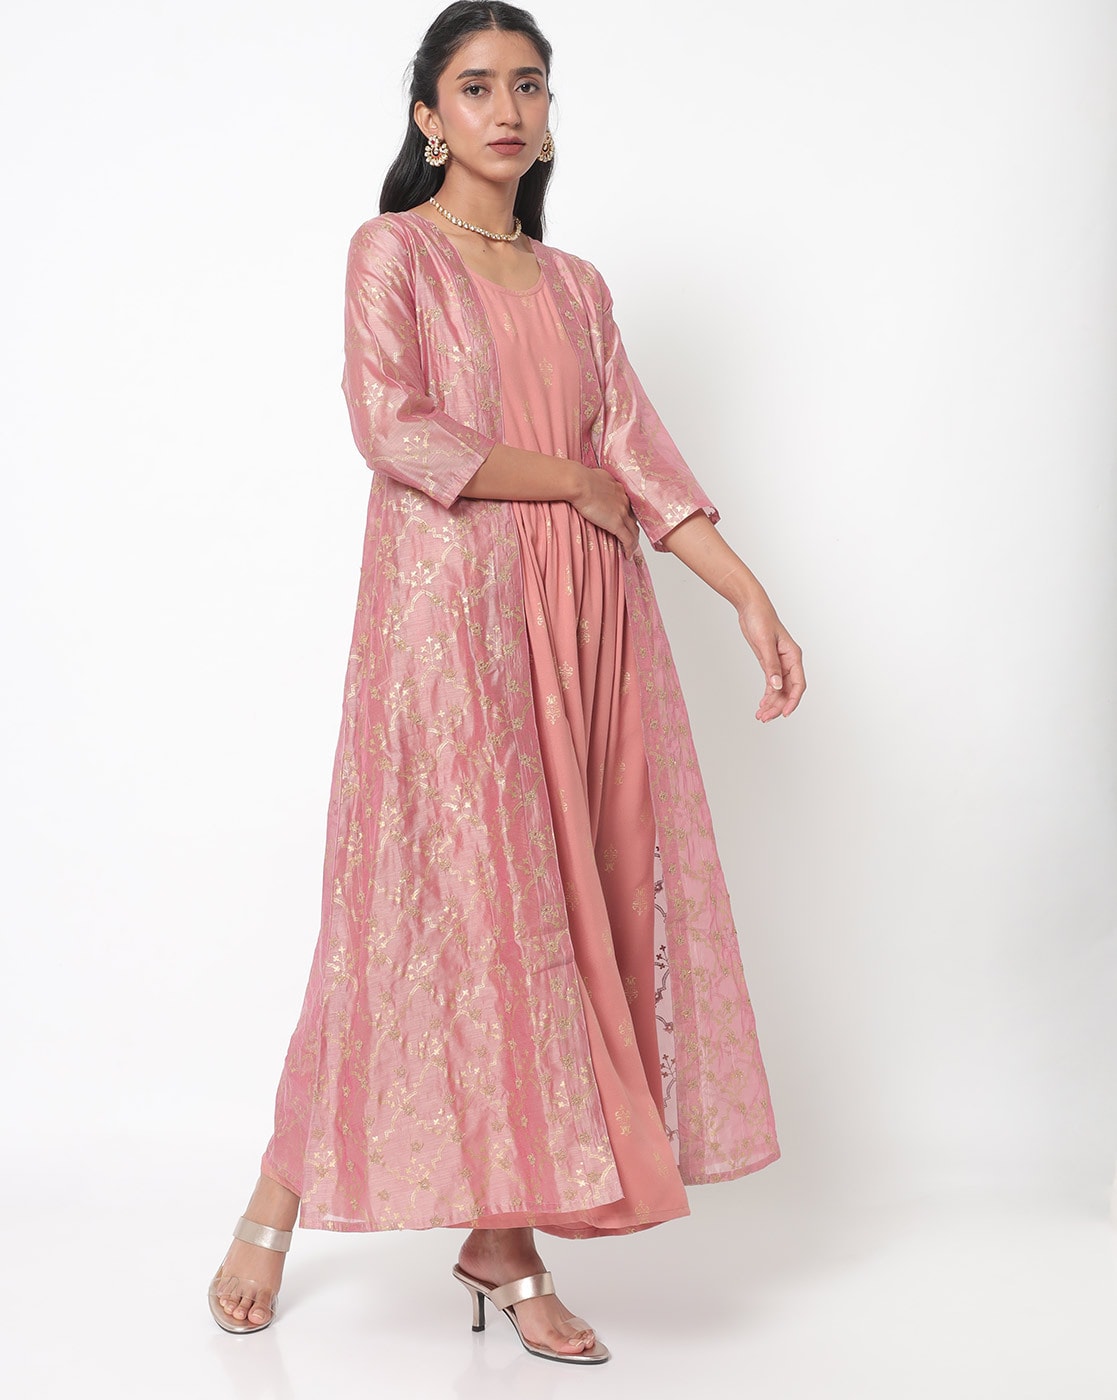 DHIV - E - Boutique - *Avaasa Anarkali kurti* 👗👗👗 Floral print Rayon  3/4th sleeve Color-Rani pink *Size M ready to dispatch* *XS to XXL  Prebooking with payment,dispatch on 20th* ~Tag price